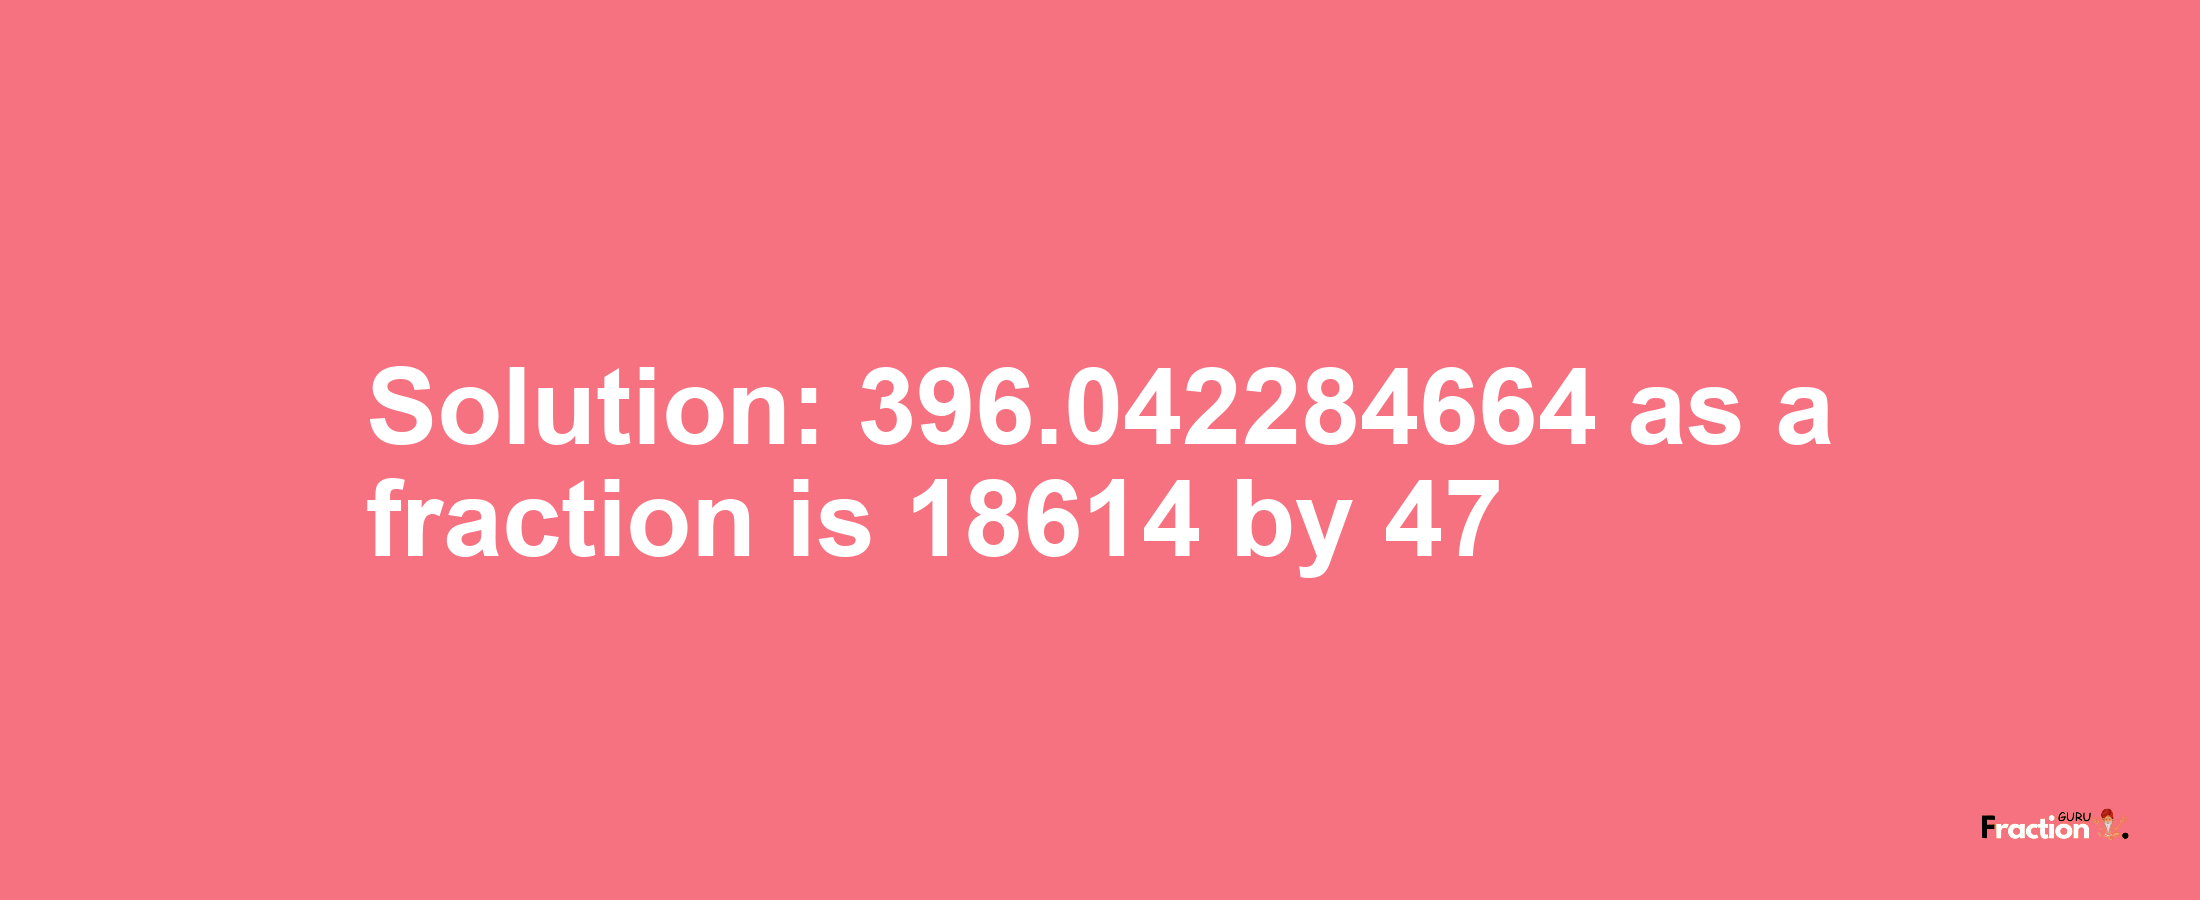 Solution:396.042284664 as a fraction is 18614/47